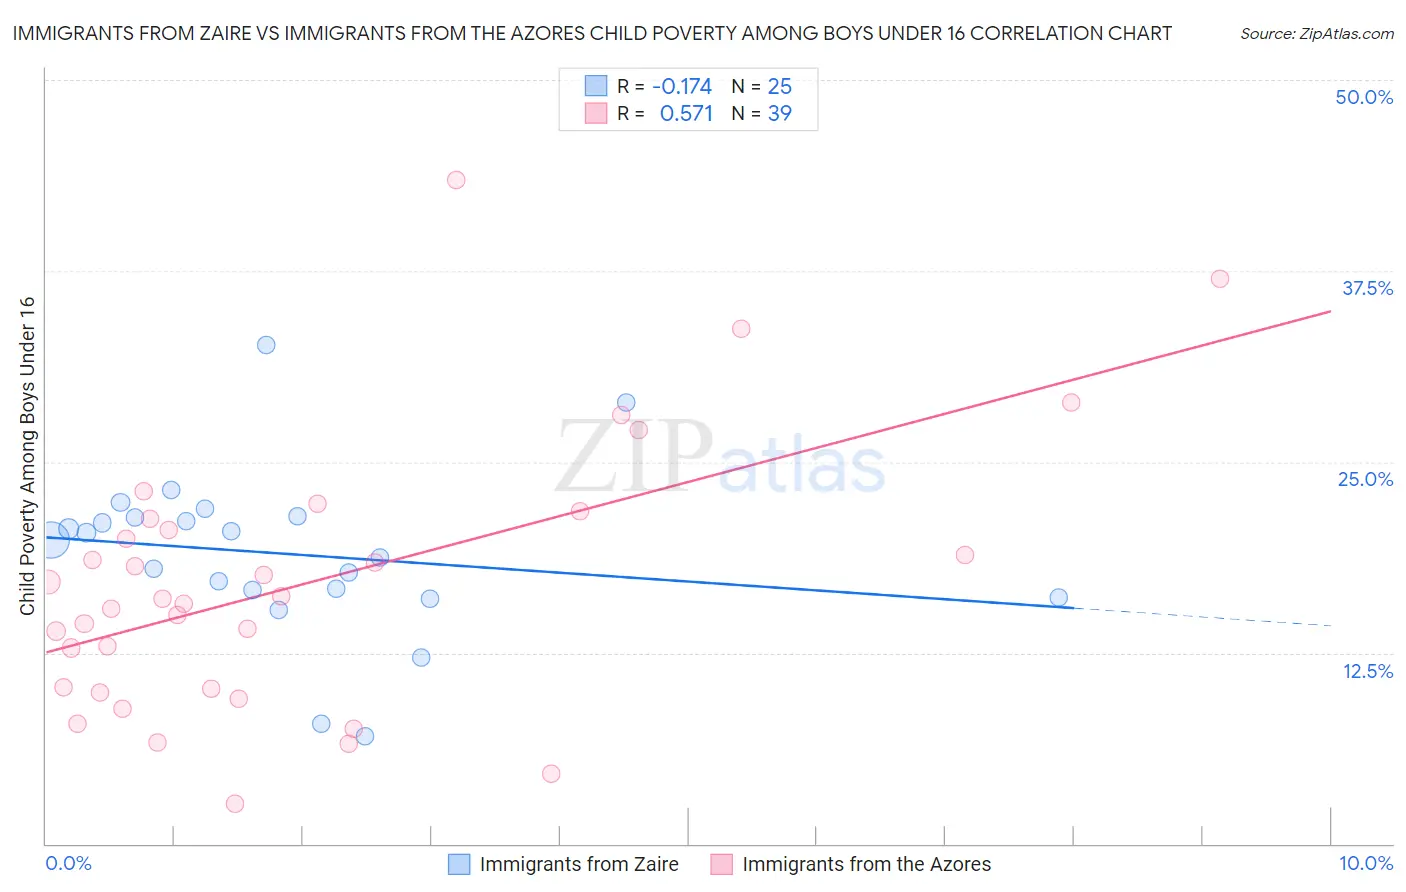 Immigrants from Zaire vs Immigrants from the Azores Child Poverty Among Boys Under 16